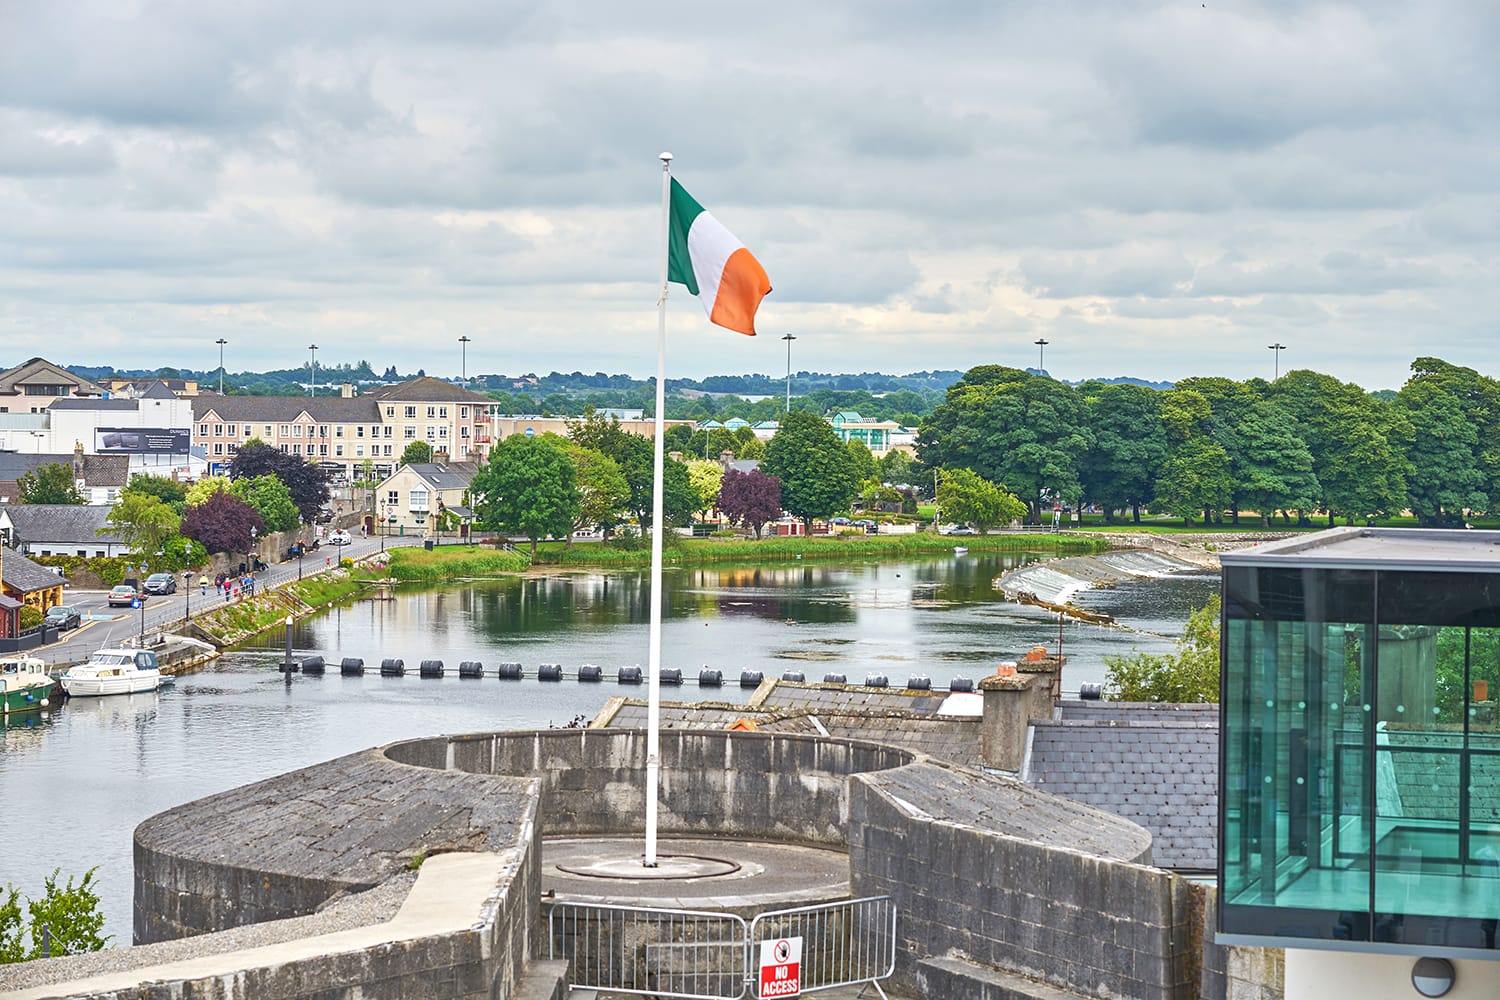 the national flag of Ireland flying on a flag pole, on a tower of Athlone Castle, Co. Westmeath, Ireland